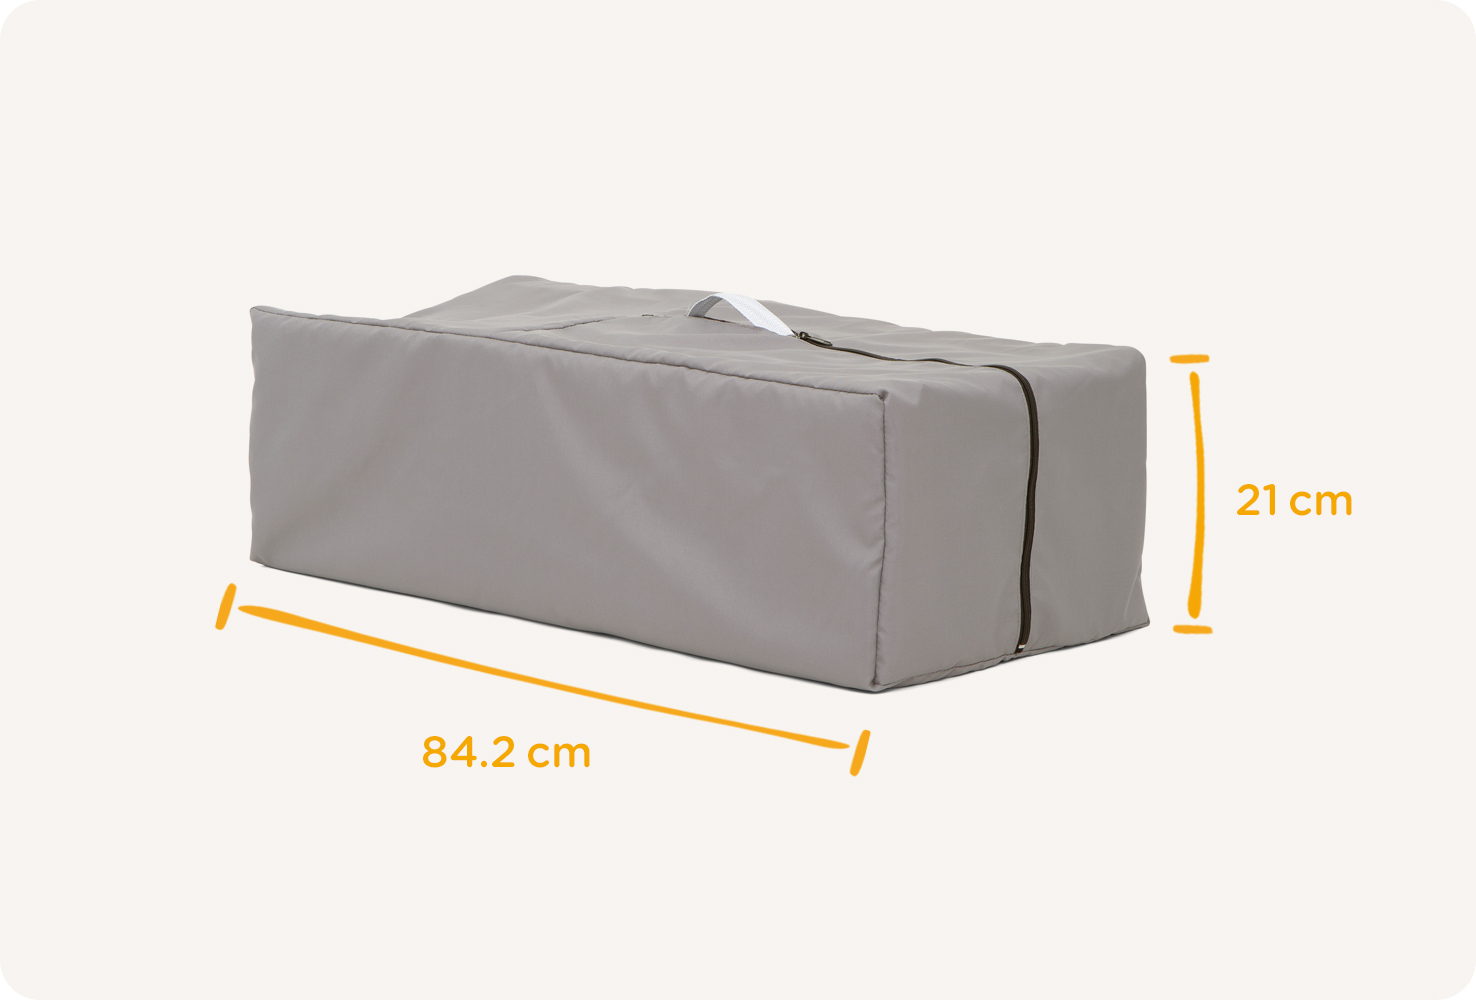 Joie travel cot commuter change & snoozer in grey packed up in travel case with measurement of 84.2cm height and 21cm width.